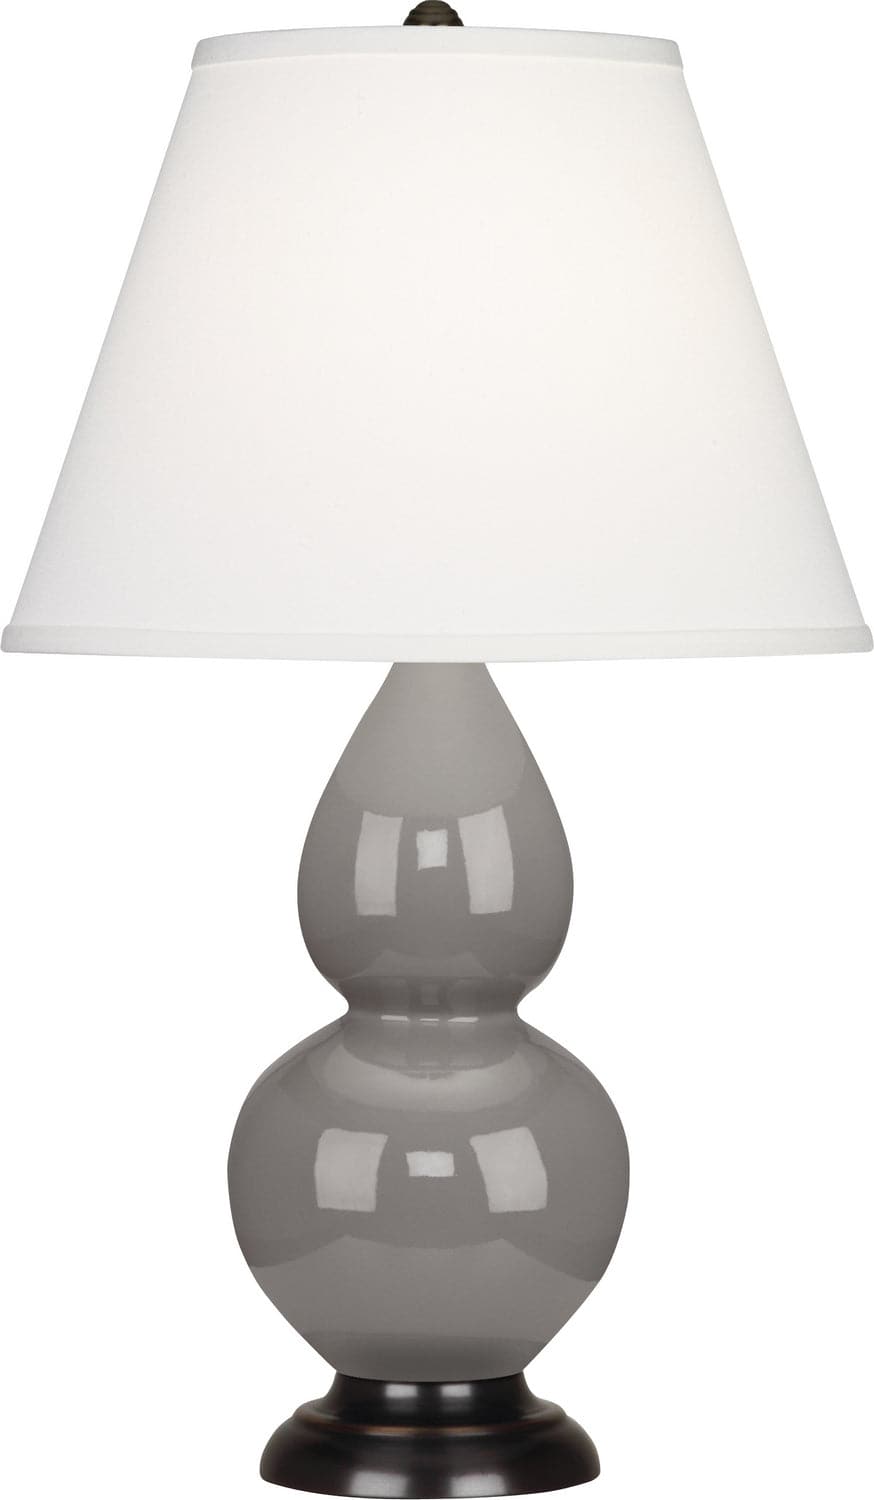 Robert Abbey - 1769X - One Light Accent Lamp - Small Double Gourd - Smoky Taupe Glazed